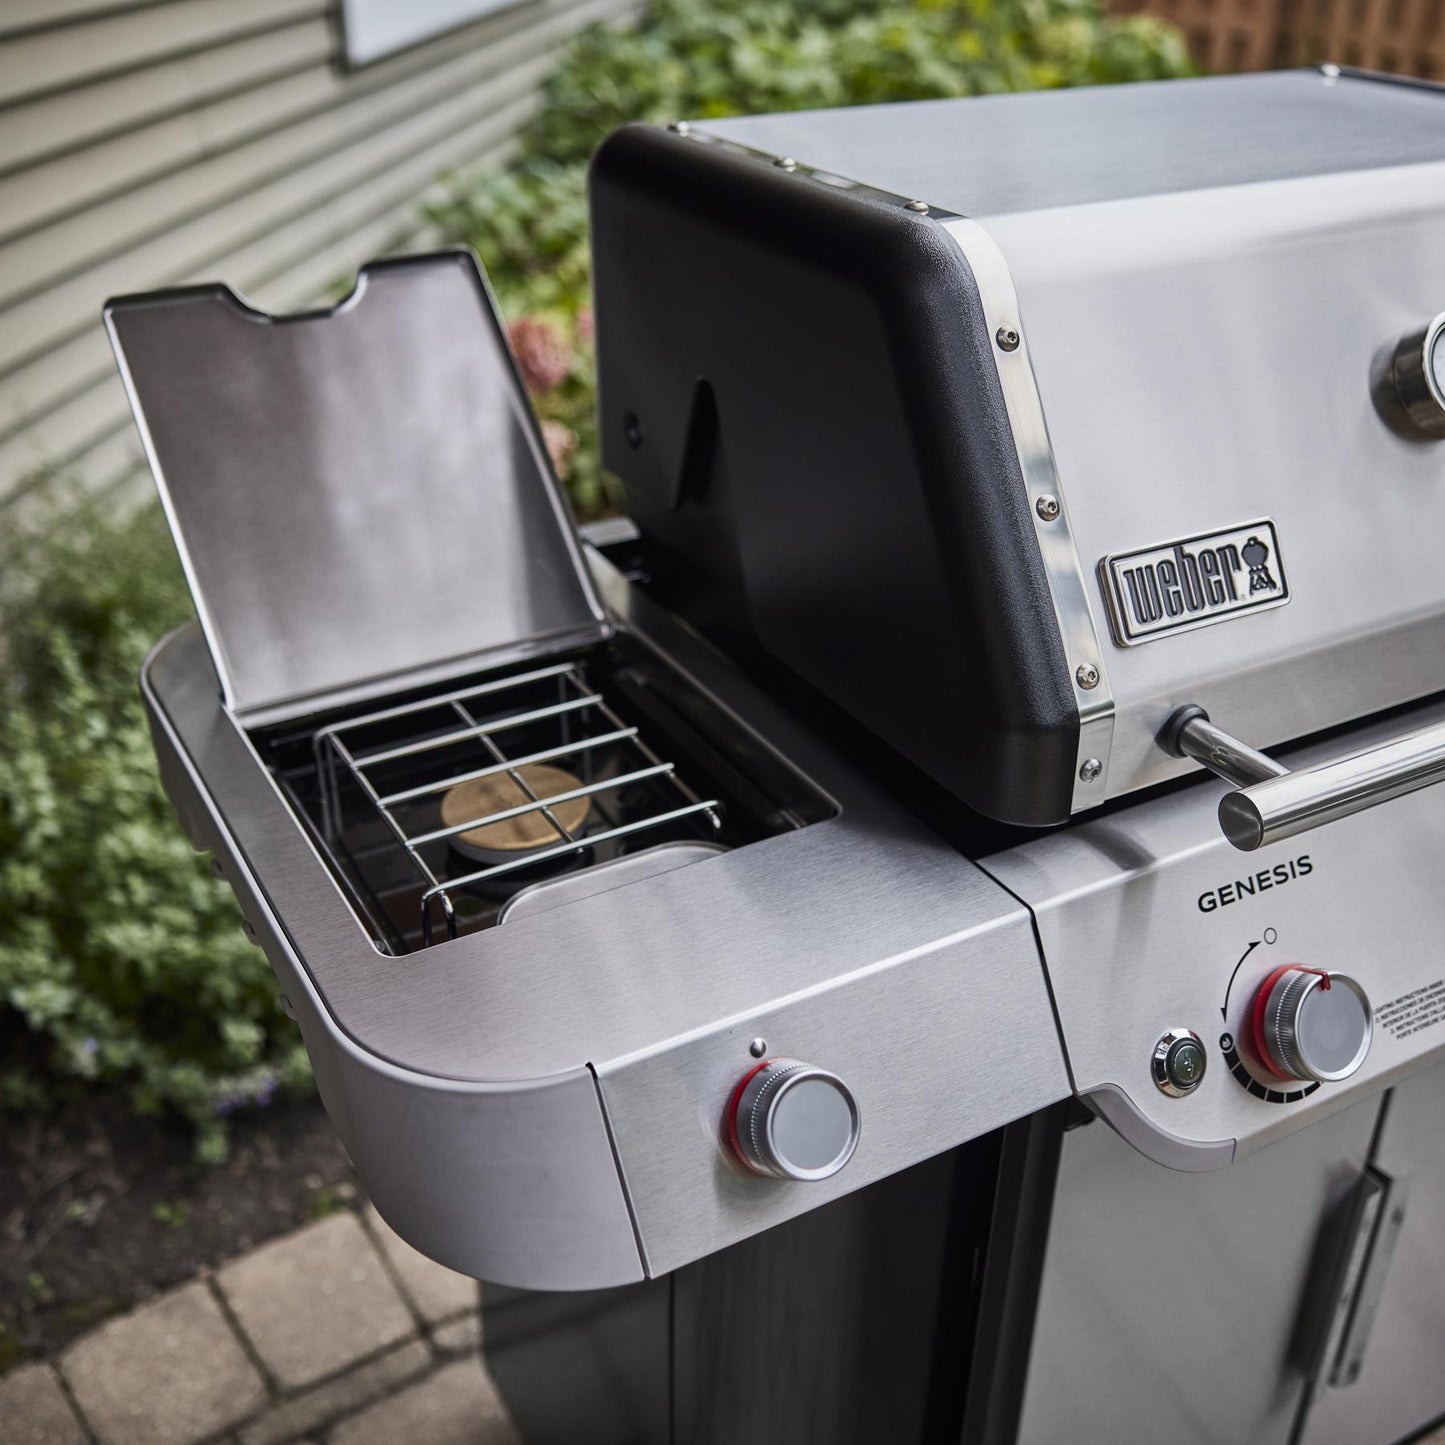 Weber 1500538 Genesis S-335 Gas Grill (Natural Gas) - Stainless Steel